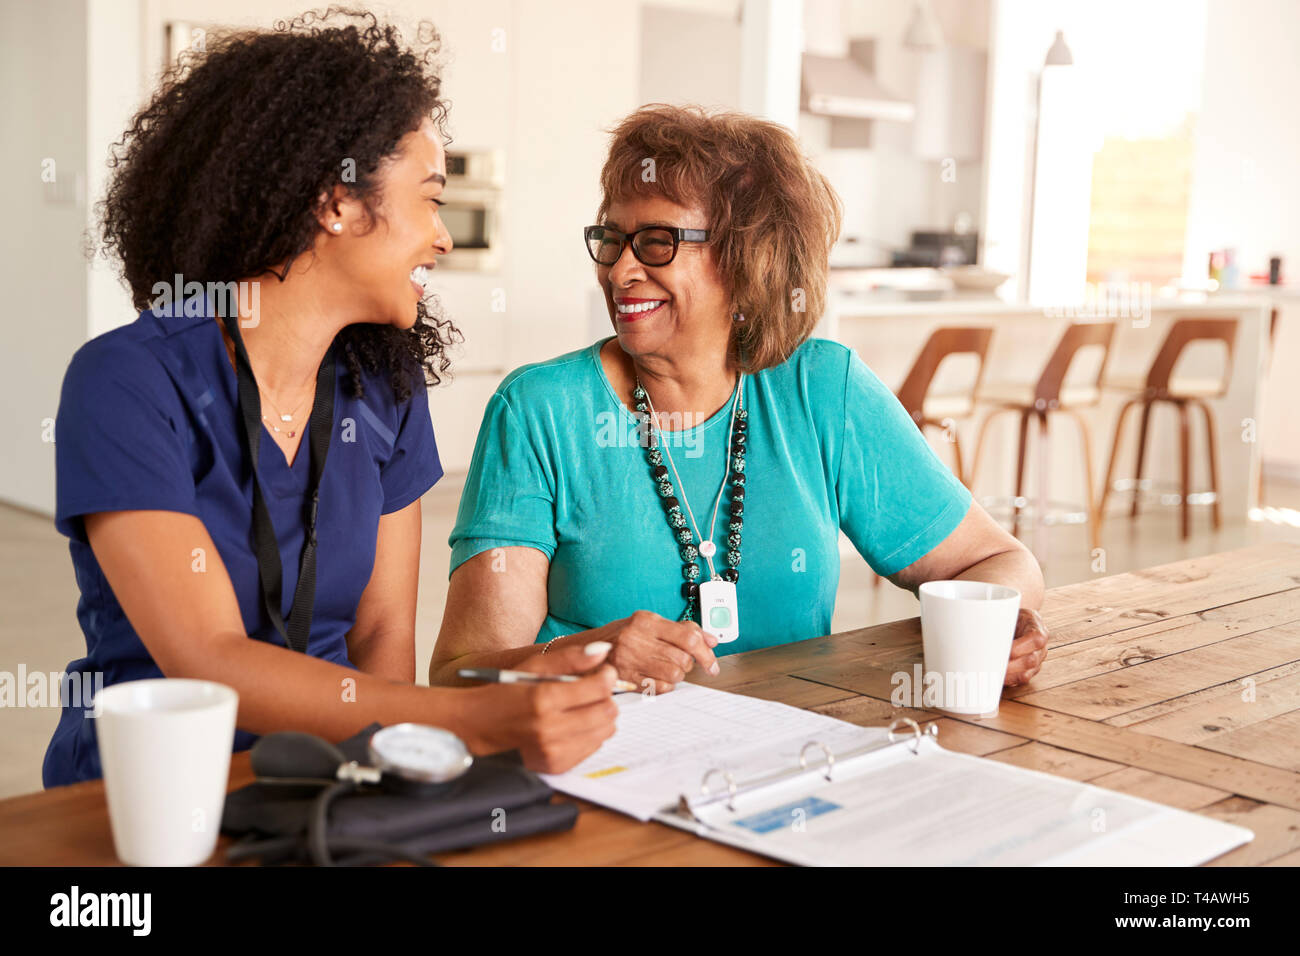 Female healthcare worker sitting at table smiling with a senior woman during a home health visit Stock Photo